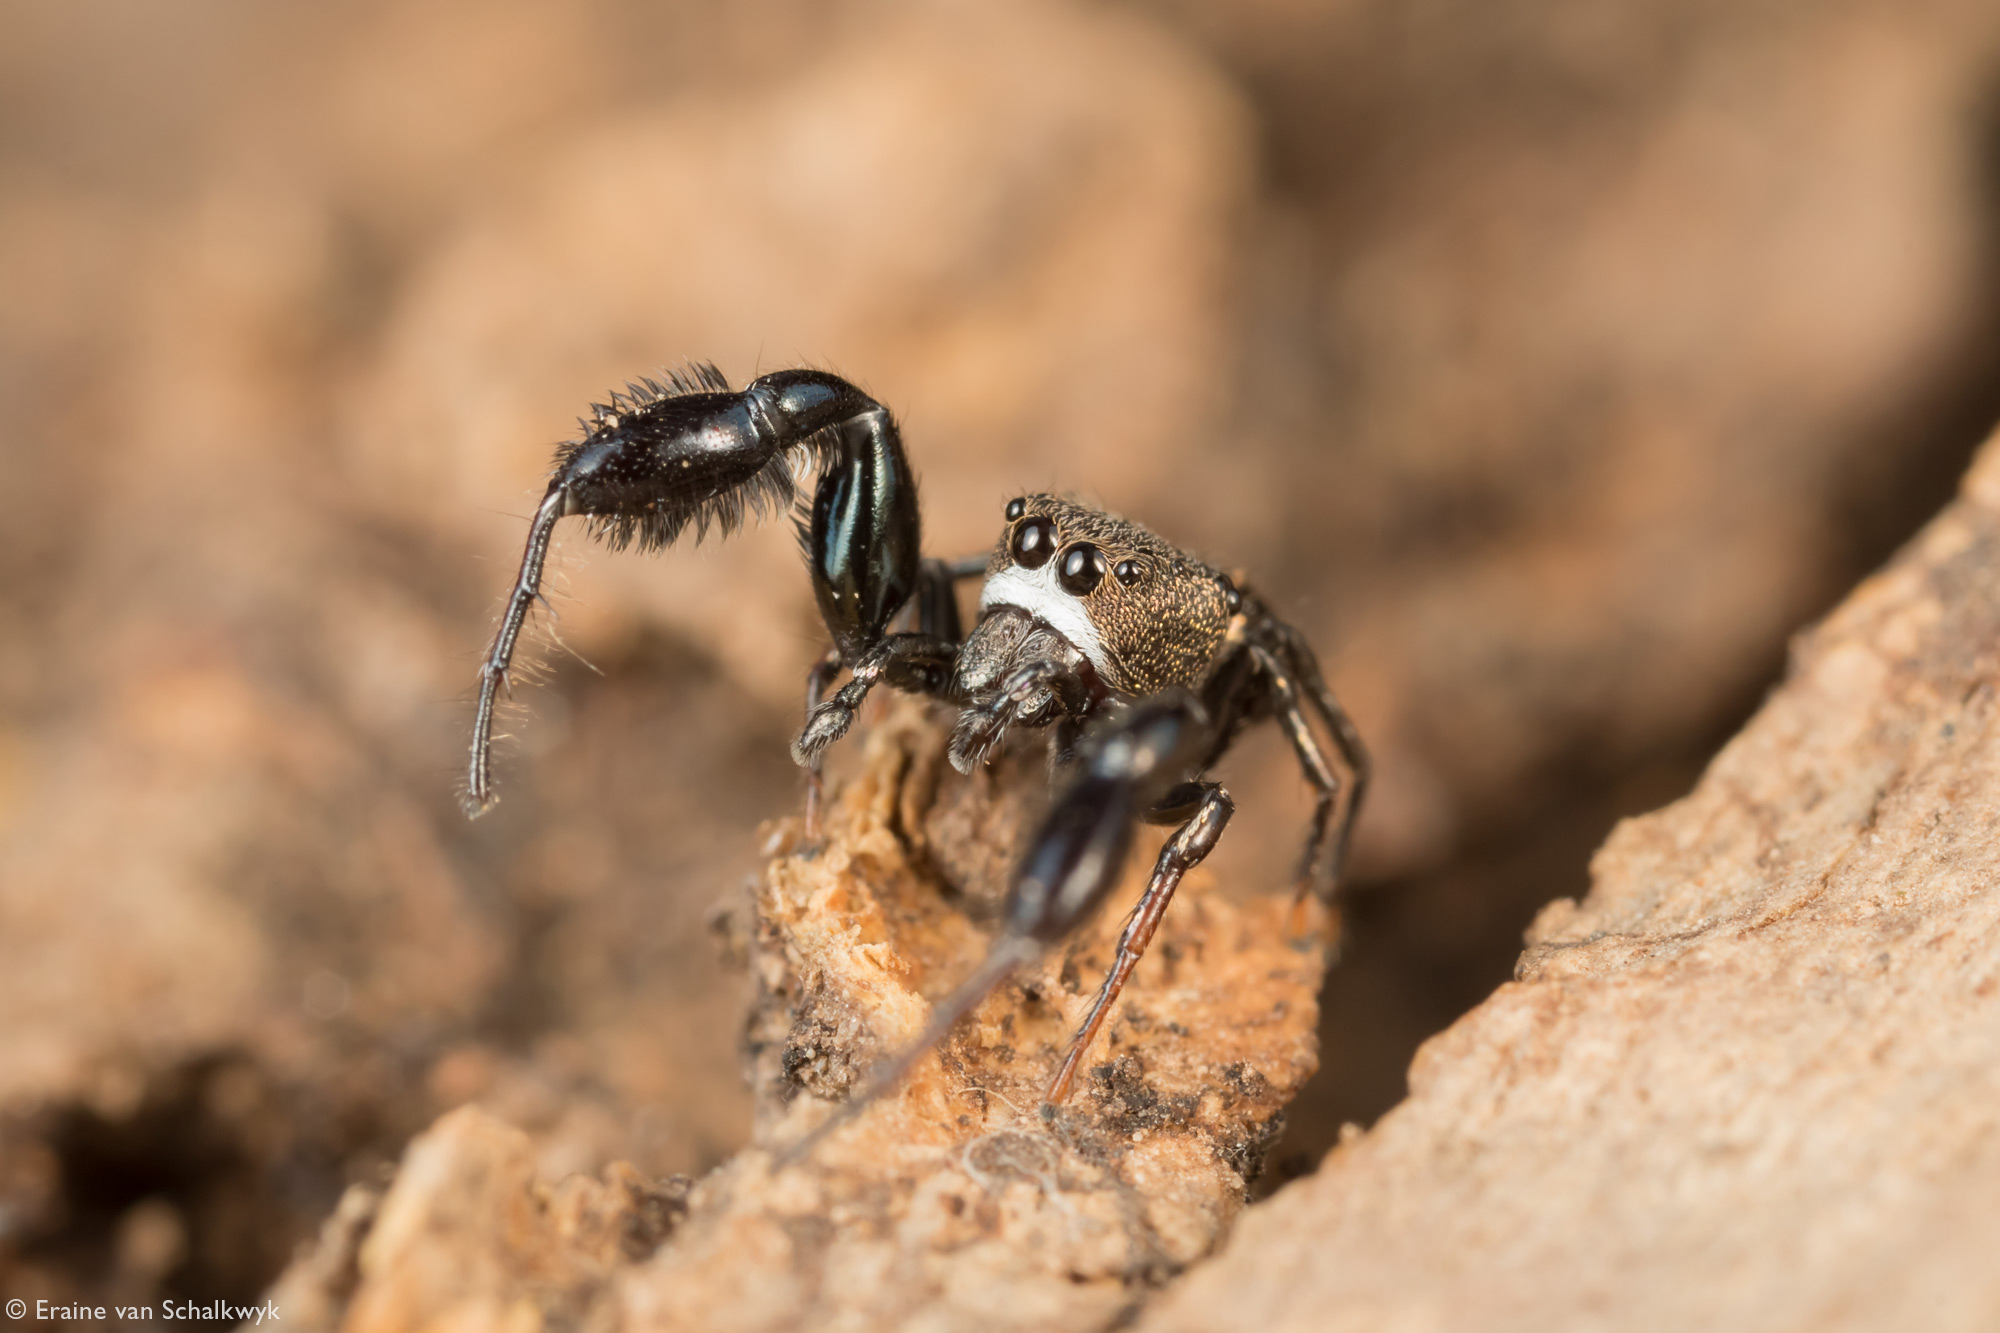 Male jumping spider, spider, arachnid, macro photography